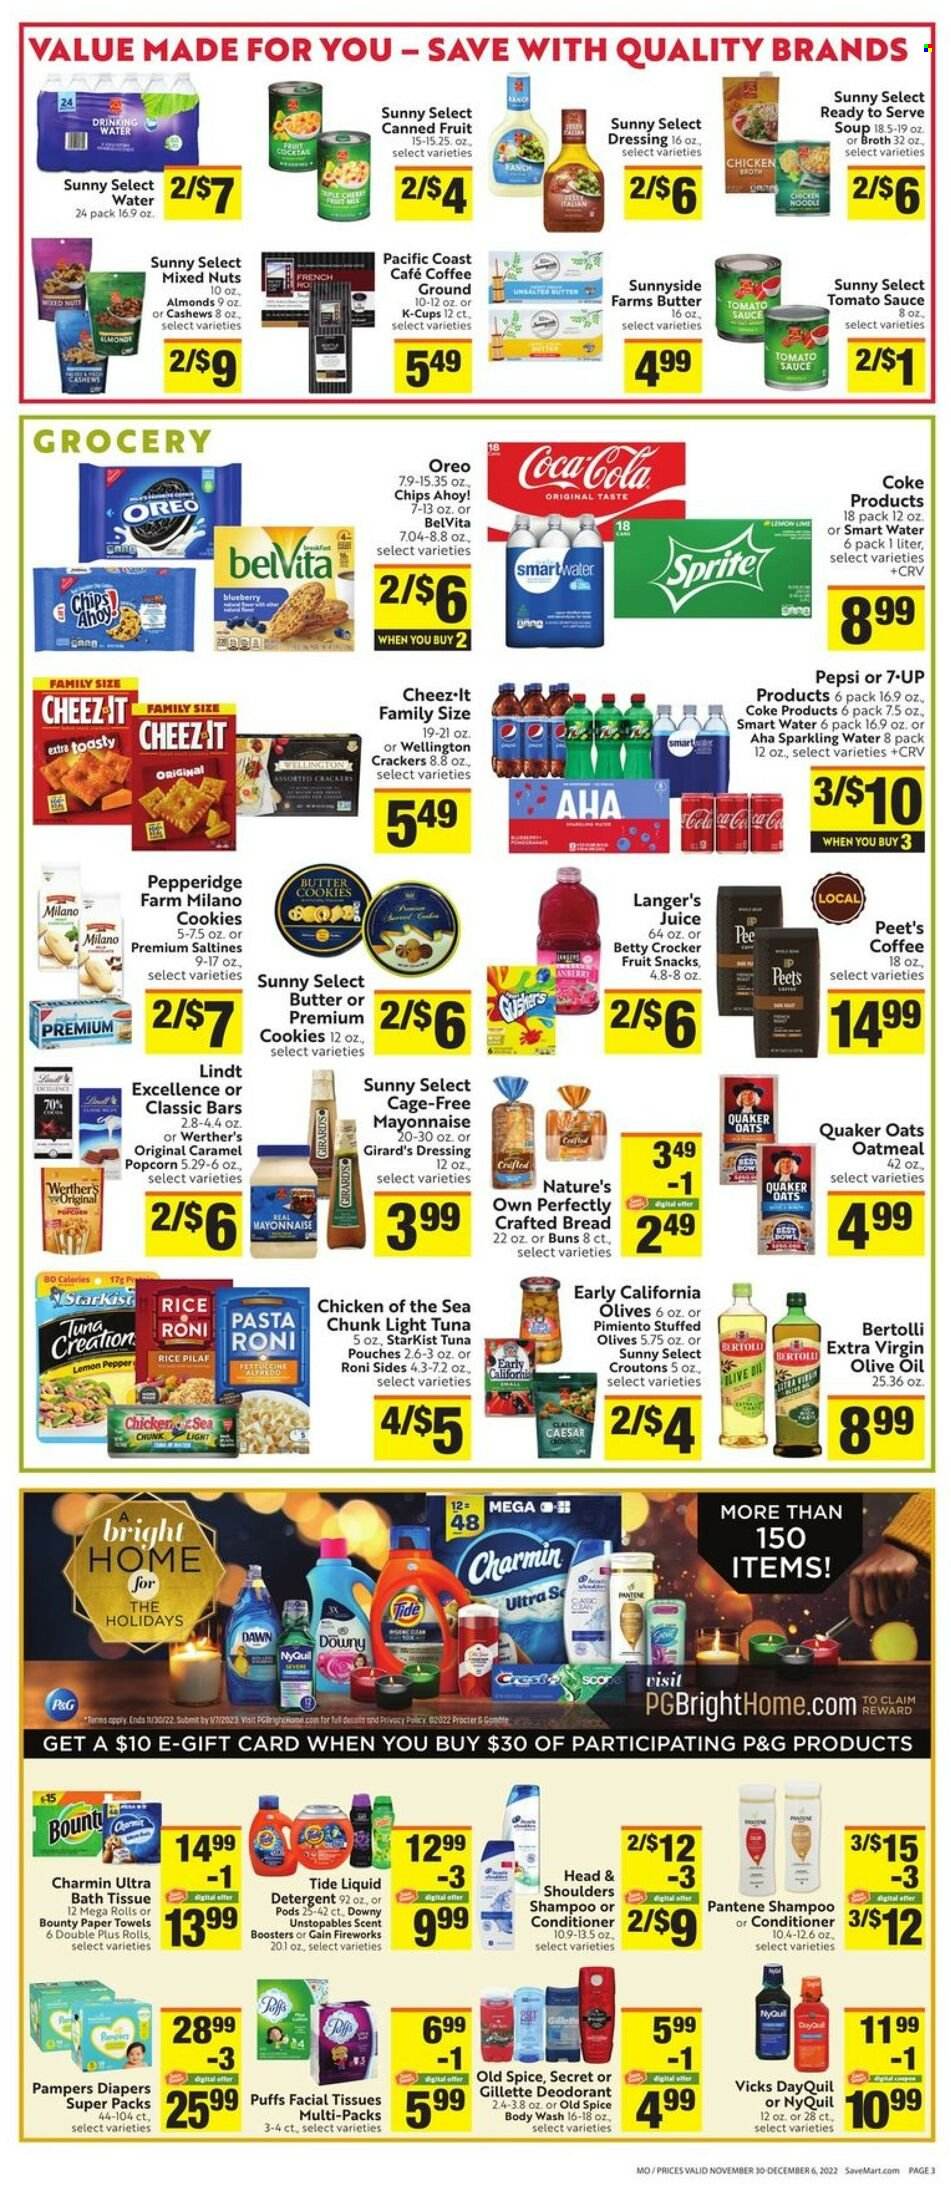 thumbnail - Save Mart Flyer - 11/30/2022 - 12/06/2022 - Sales products - bread, buns, puffs, tuna, StarKist, soup, pasta, sauce, Quaker, Bertolli, Oreo, cage free eggs, mayonnaise, cookies, butter cookies, Lindt, Bounty, crackers, fruit snack, Chips Ahoy!, chips, popcorn, Cheez-It, saltines, croutons, chicken broth, oatmeal, oats, broth, tomato sauce, olives, light tuna, Chicken of the Sea, canned fruit, belVita, rice, spice, caramel, dressing, extra virgin olive oil, olive oil, oil, almonds, cashews, mixed nuts, Coca-Cola, Sprite, Pepsi, juice, 7UP, sparkling water, Smartwater, coffee, coffee capsules, K-Cups, Pampers, nappies, Gain, Tide, Unstopables, liquid detergent, scent booster, Gain Fireworks, body wash, shampoo, Old Spice, facial tissues, conditioner, Head & Shoulders, Pantene, DayQuil, NyQuil, Nature's Own, Vicks. Page 3.